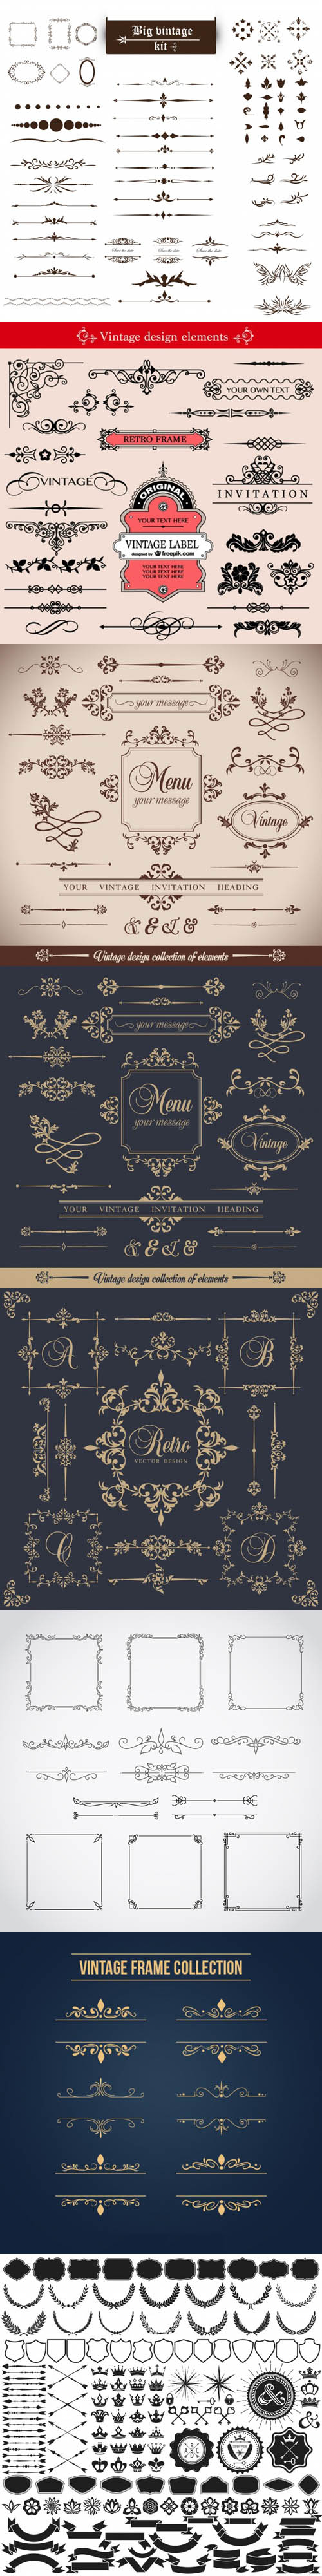 Design Collection of Ornamental Elements Vector